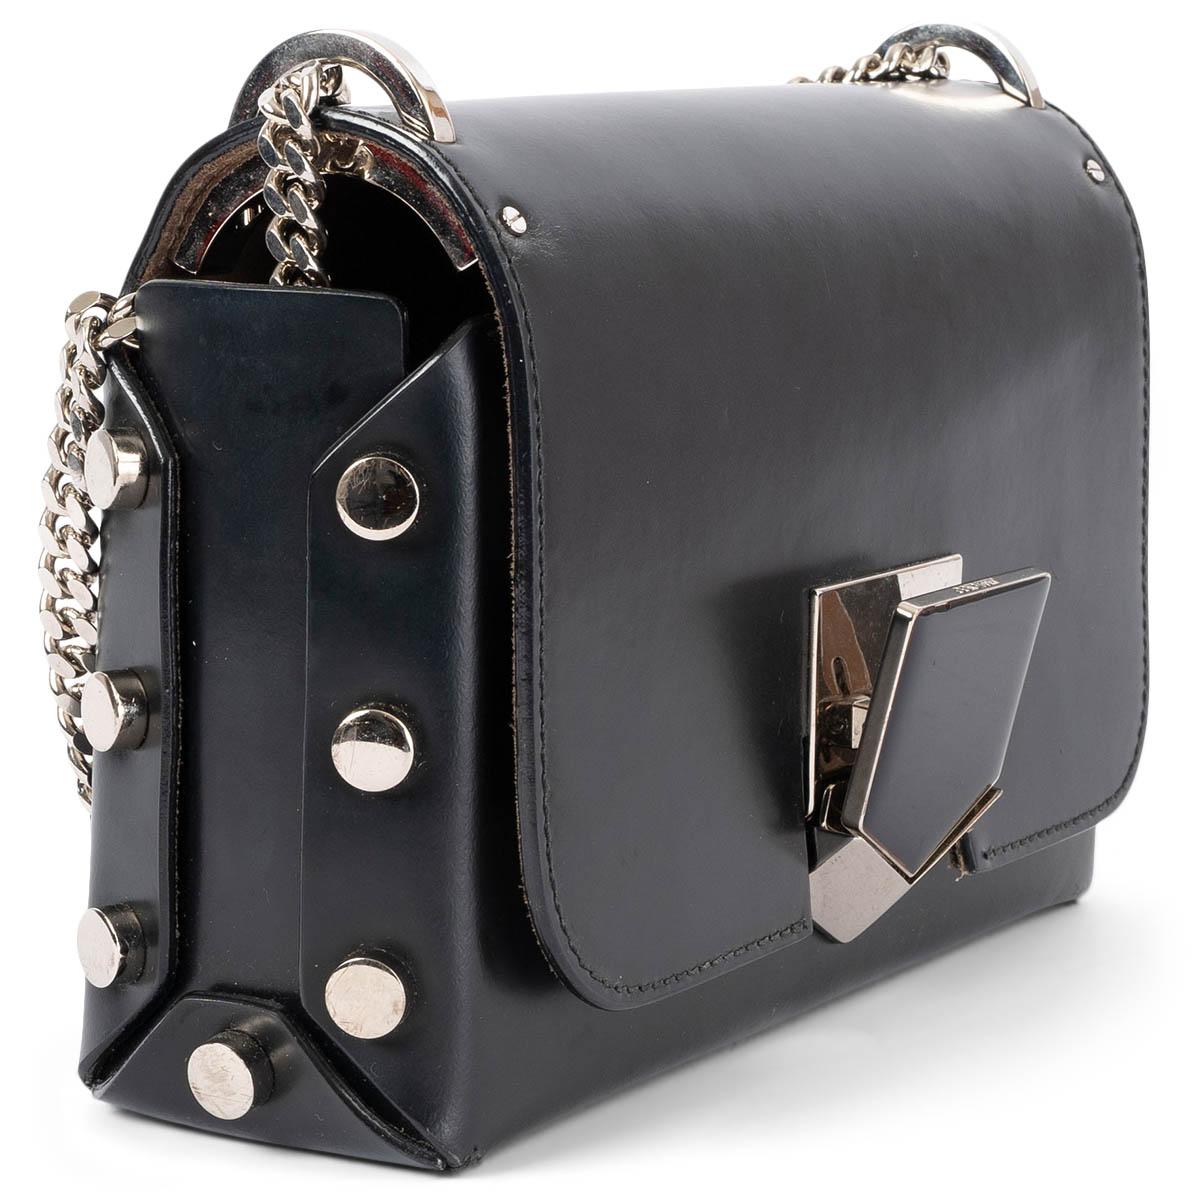 100% authentic Jimmy Choo Lockett Petite shoulder bag in smooth black leather featuring silver-tone hardware. It opens by a patented push-lock clasp to a brown suede-lined interior. The design comes with a knot chain strap and metal studs on the